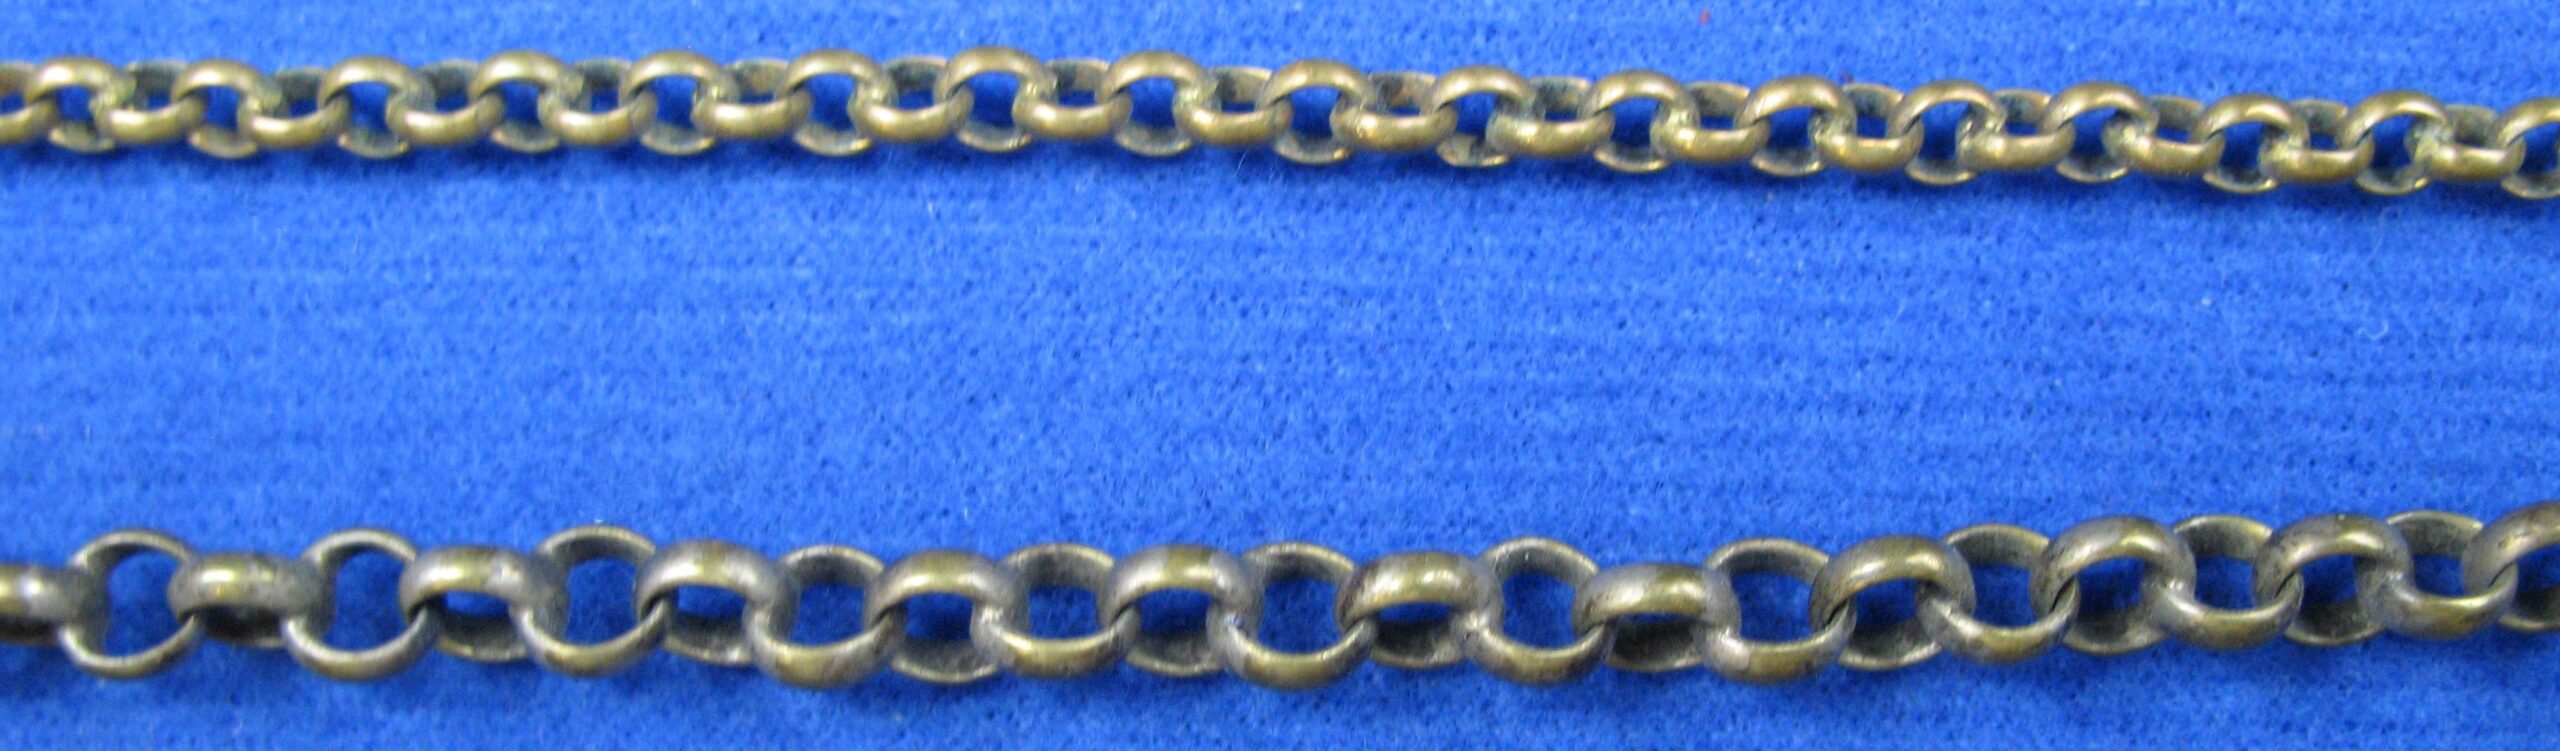 whistle chains